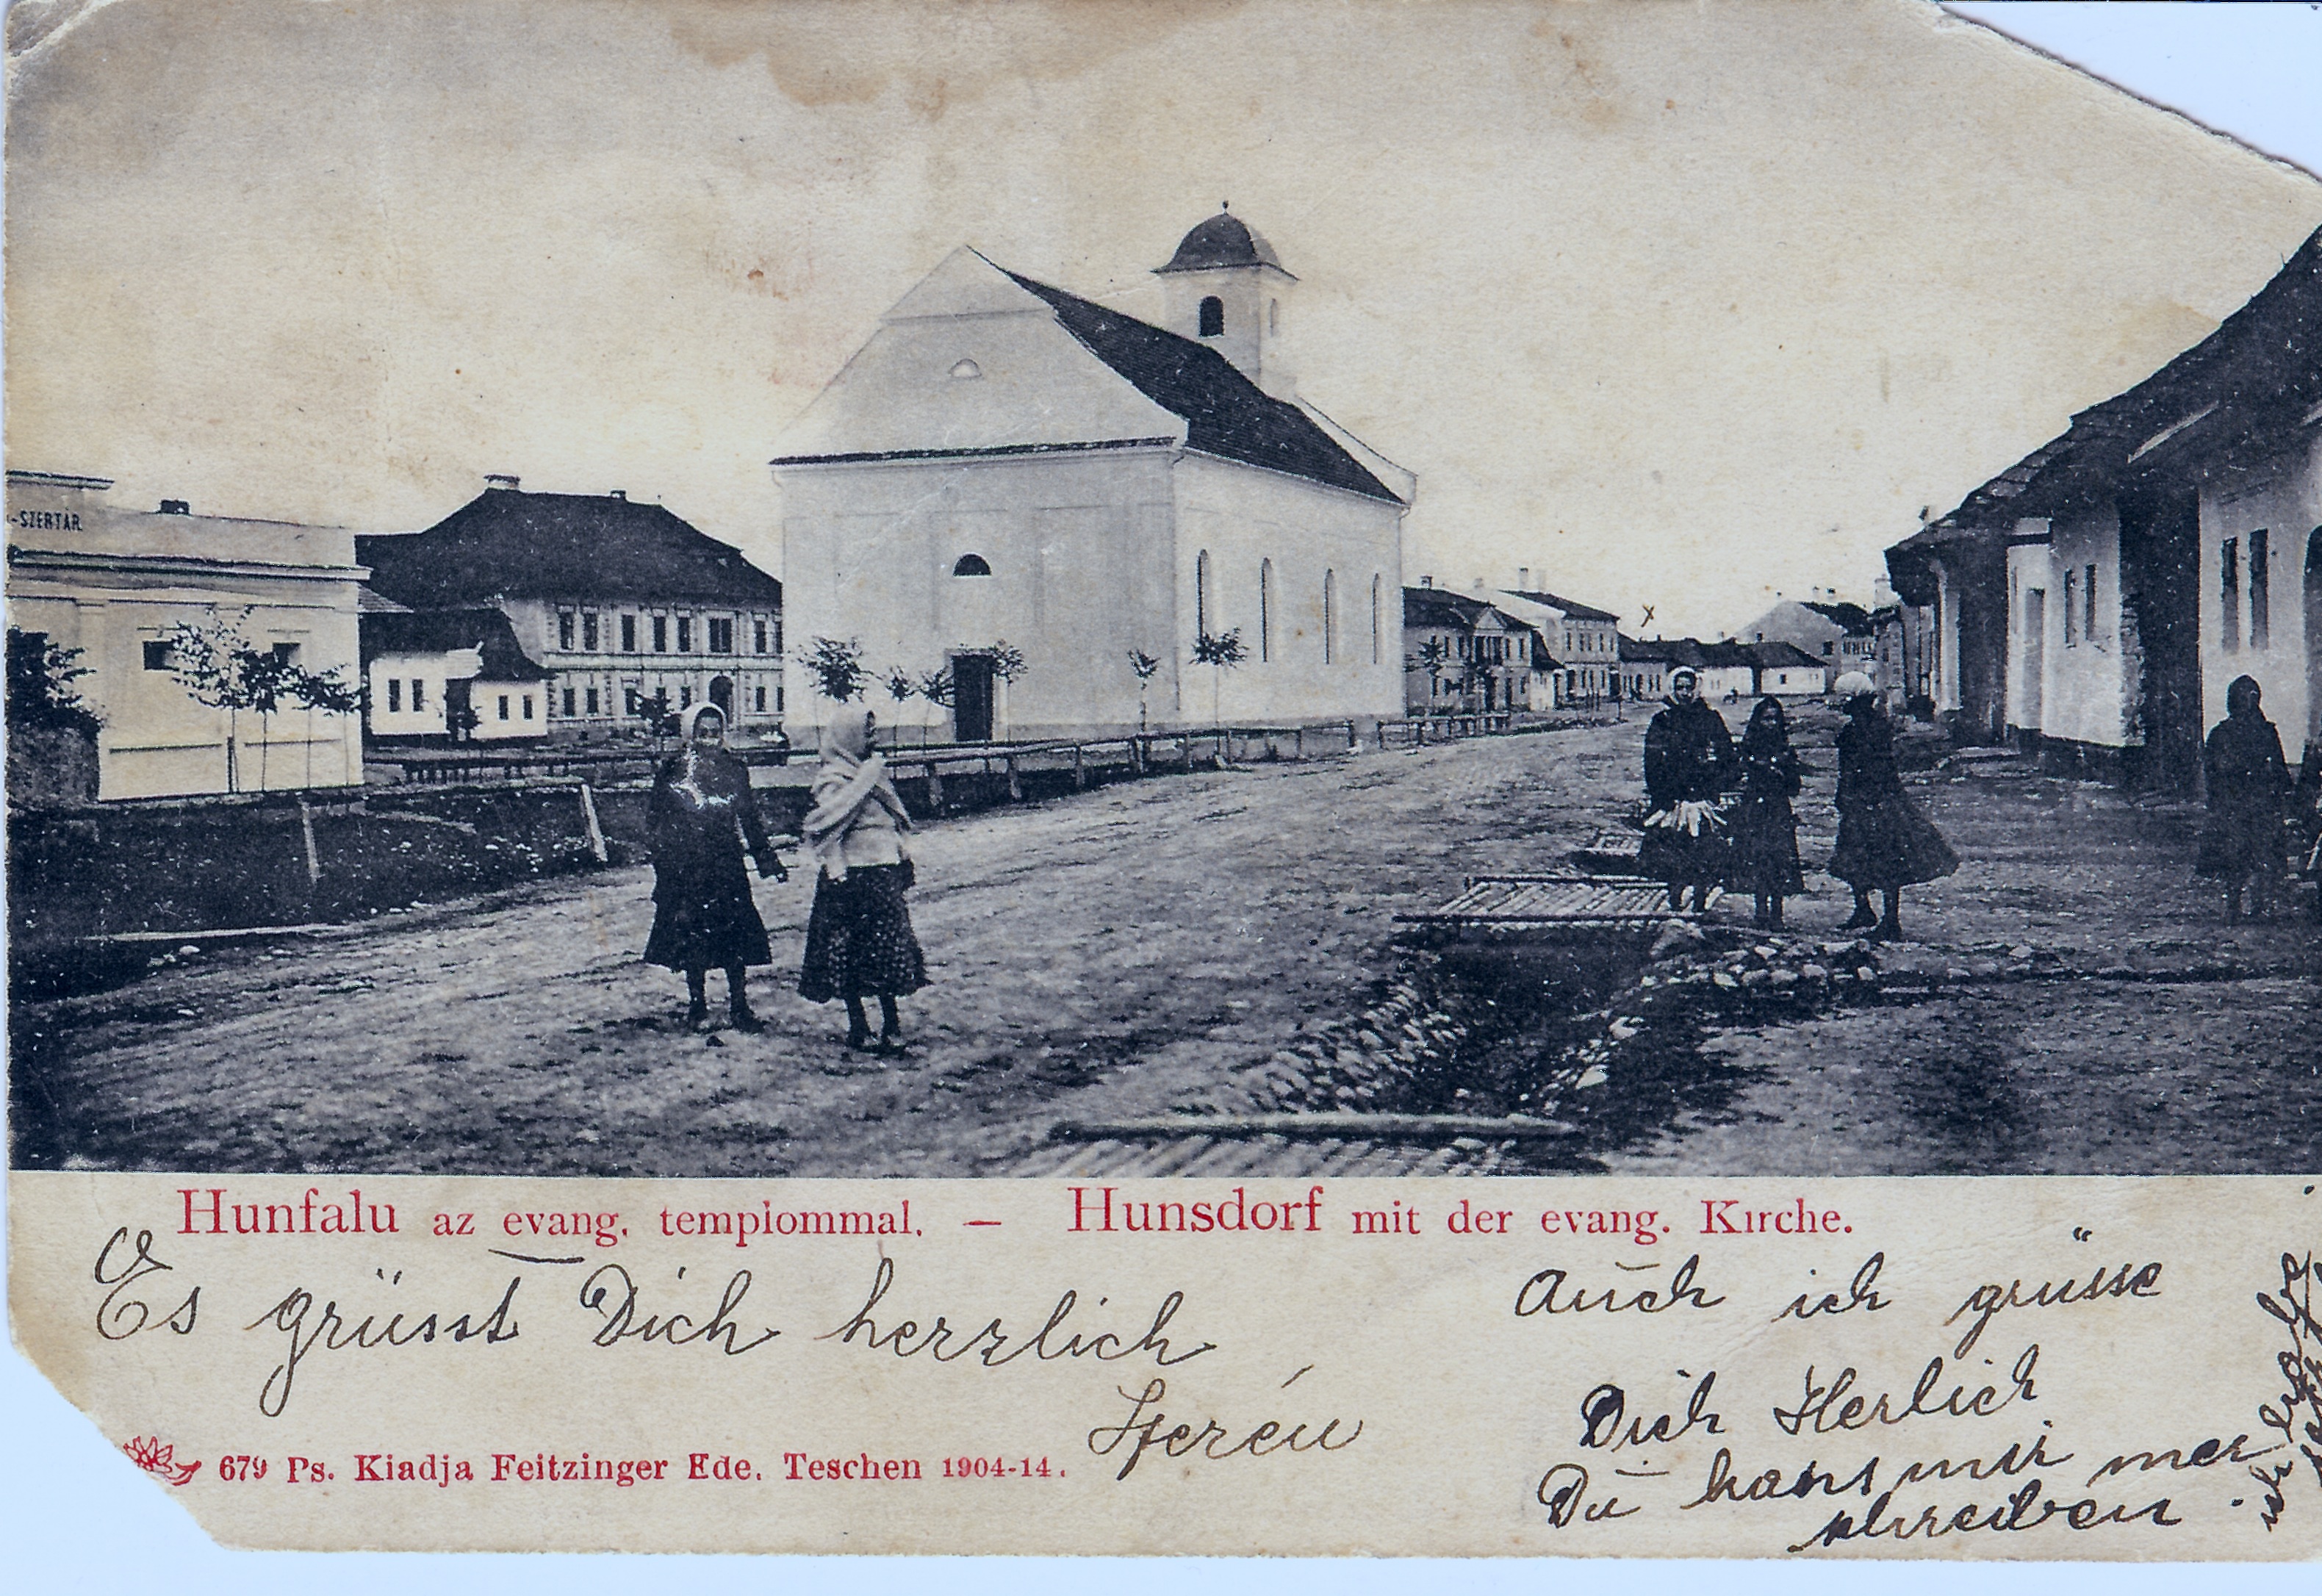 Old Hunsdorf postcard with Evangelical Church